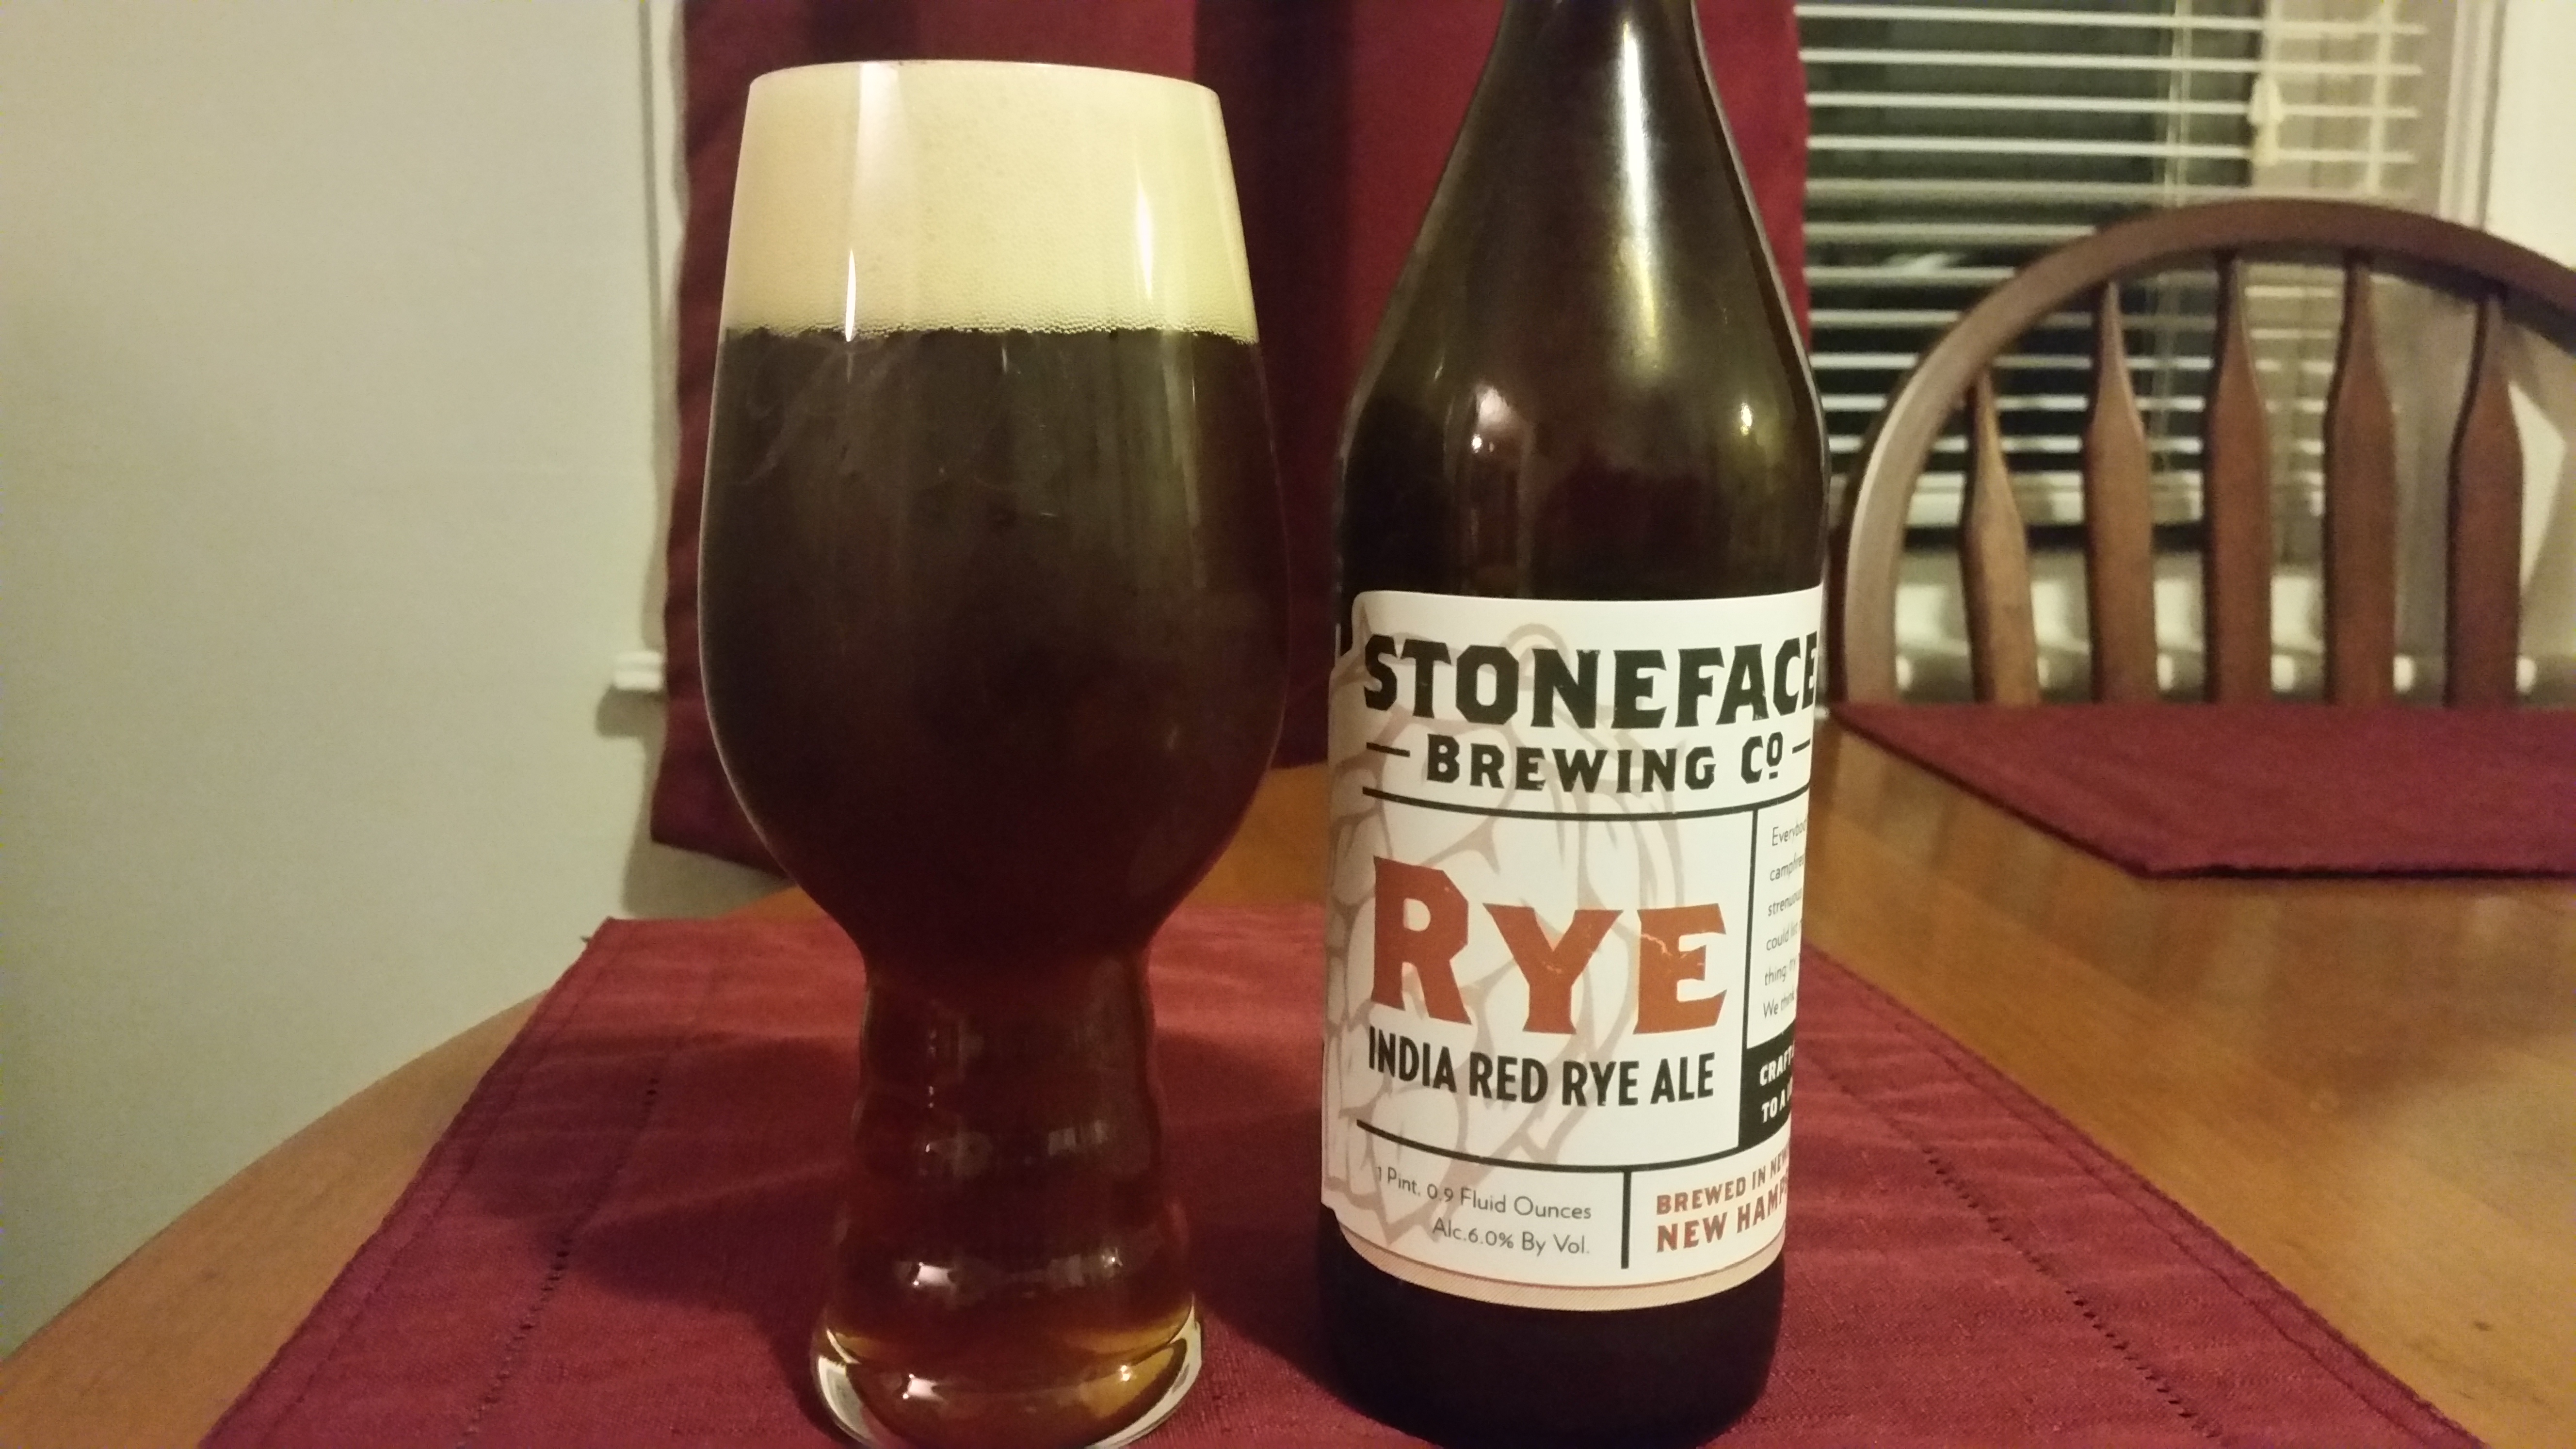 Stoneface India Red Rye Ale